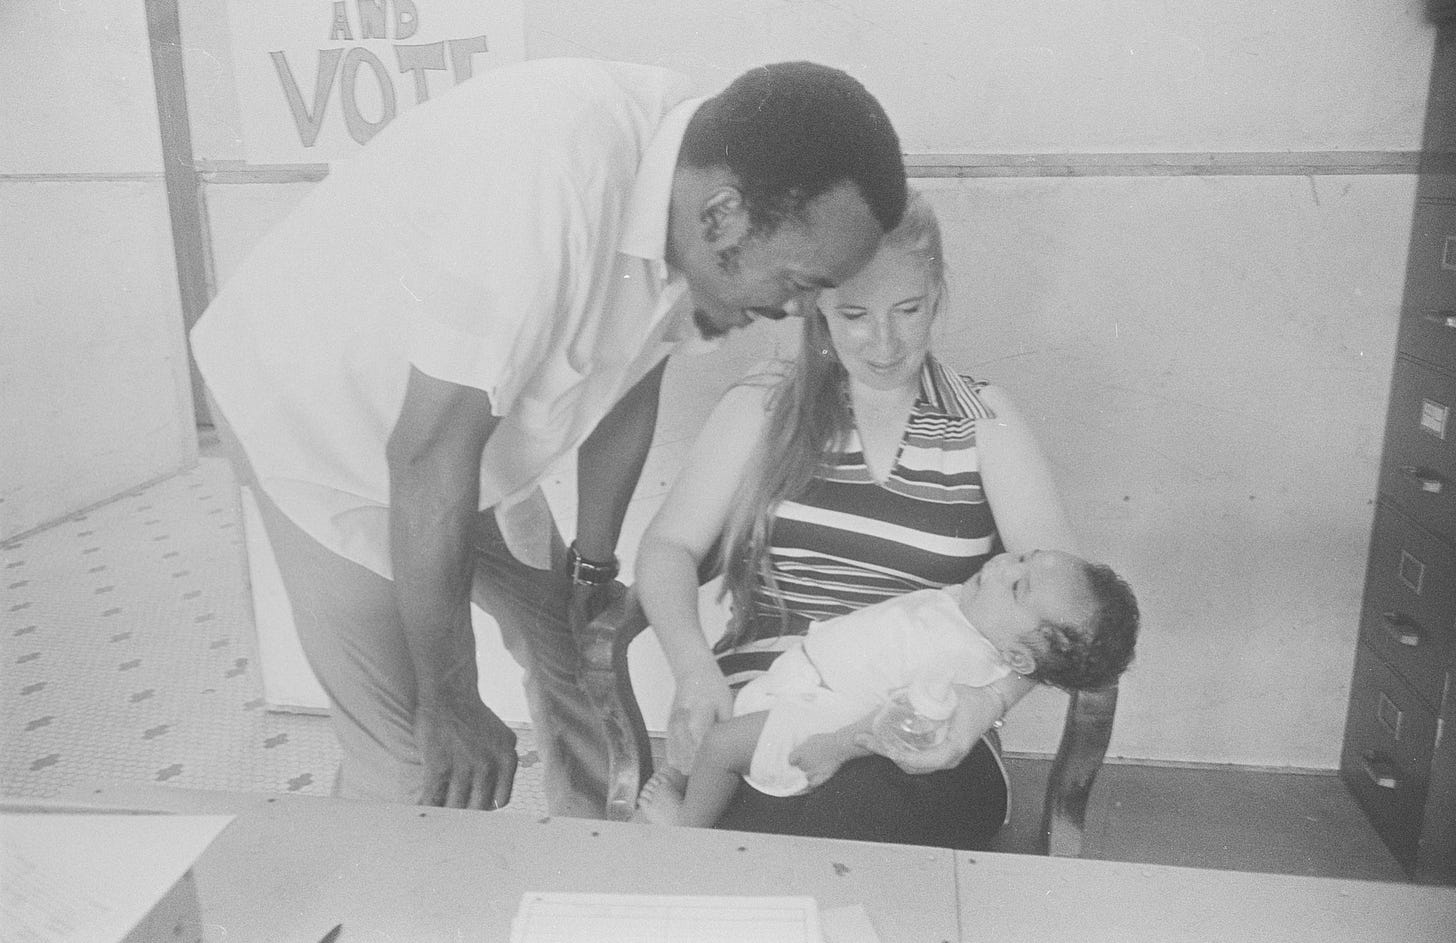 UFW organizers Dianna Lyons, Mack Lyons, and their son Rick Lyons at the union office, Haines City, Florida, 1972. Photo by John Kouns. © Tom and Ethel Bradley Center.